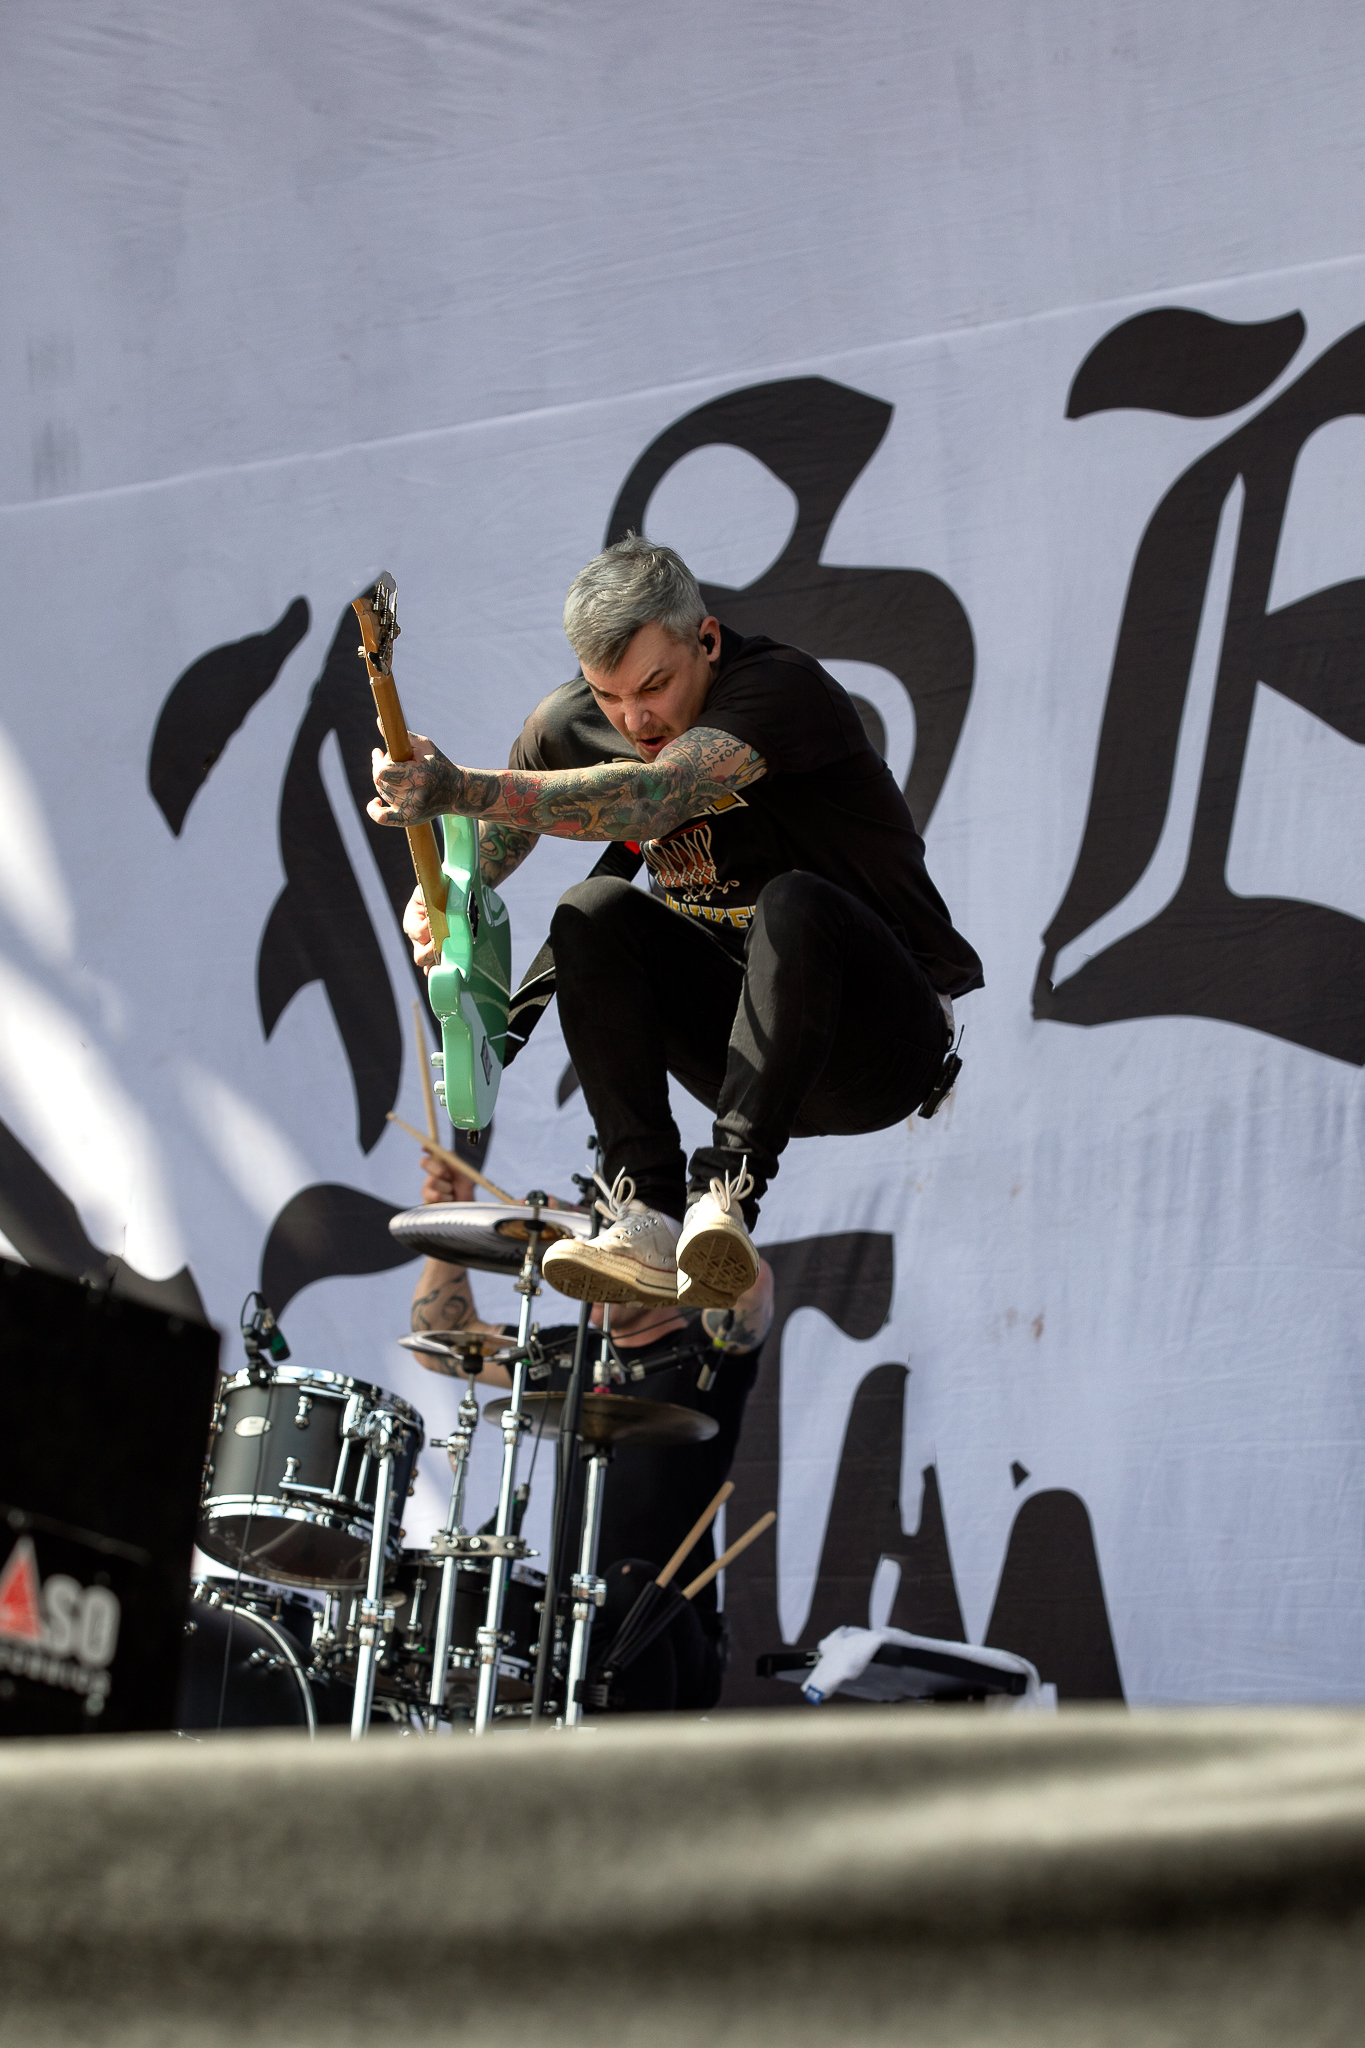 The_Amith_Affliction_Download110319_Nathan- (1).JPG